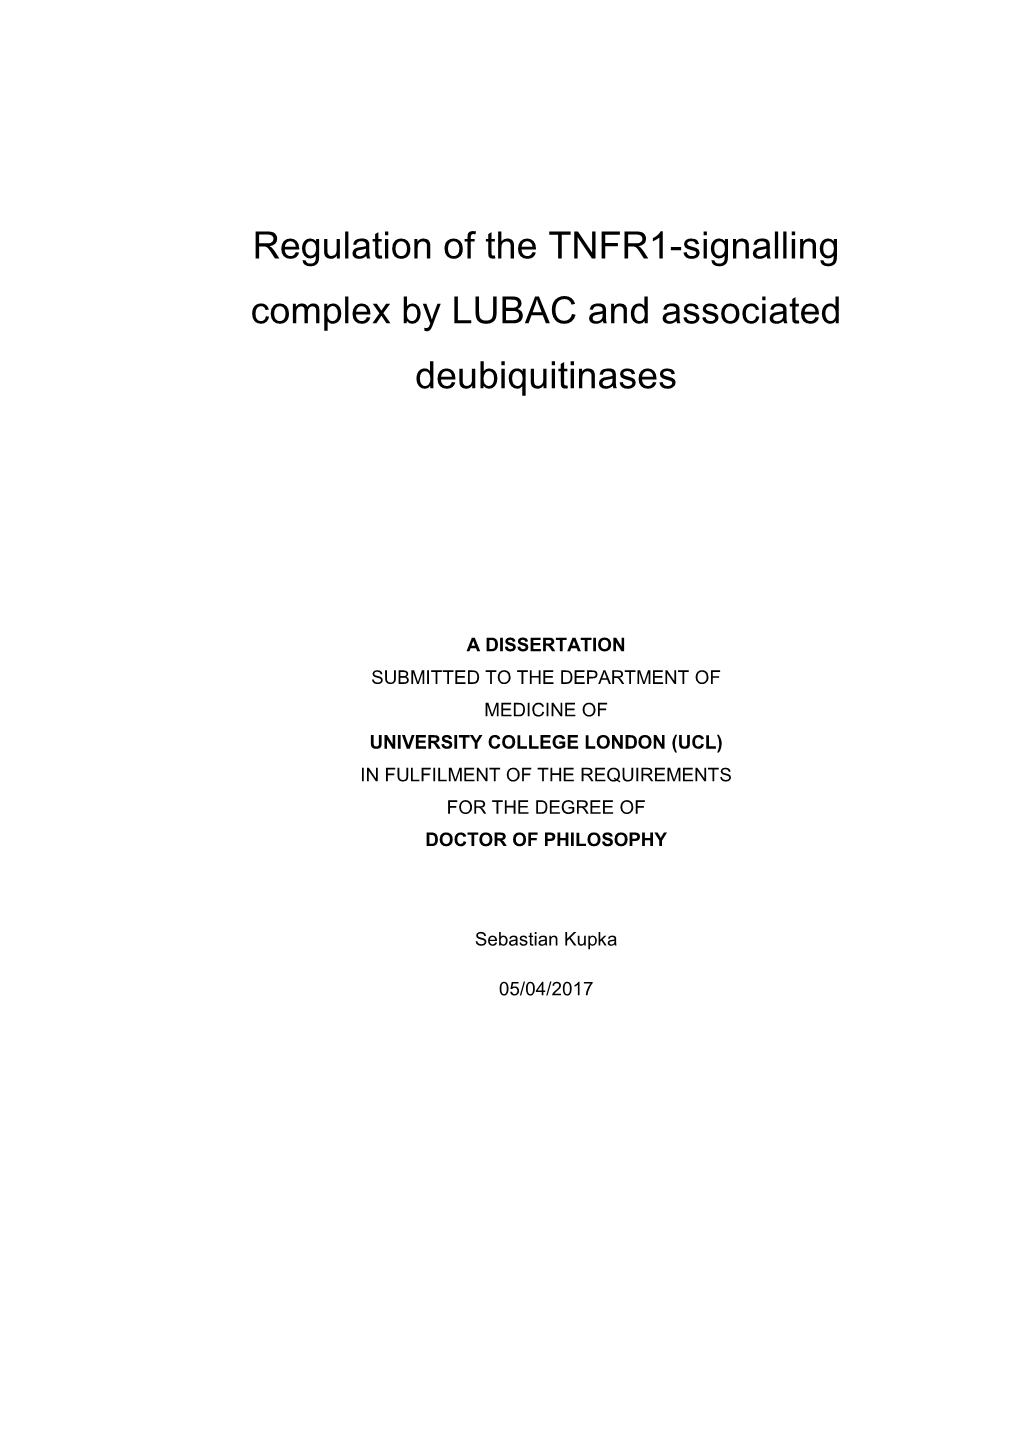 Regulation of the TNFR1-Signalling Complex by LUBAC and Associated Deubiquitinases